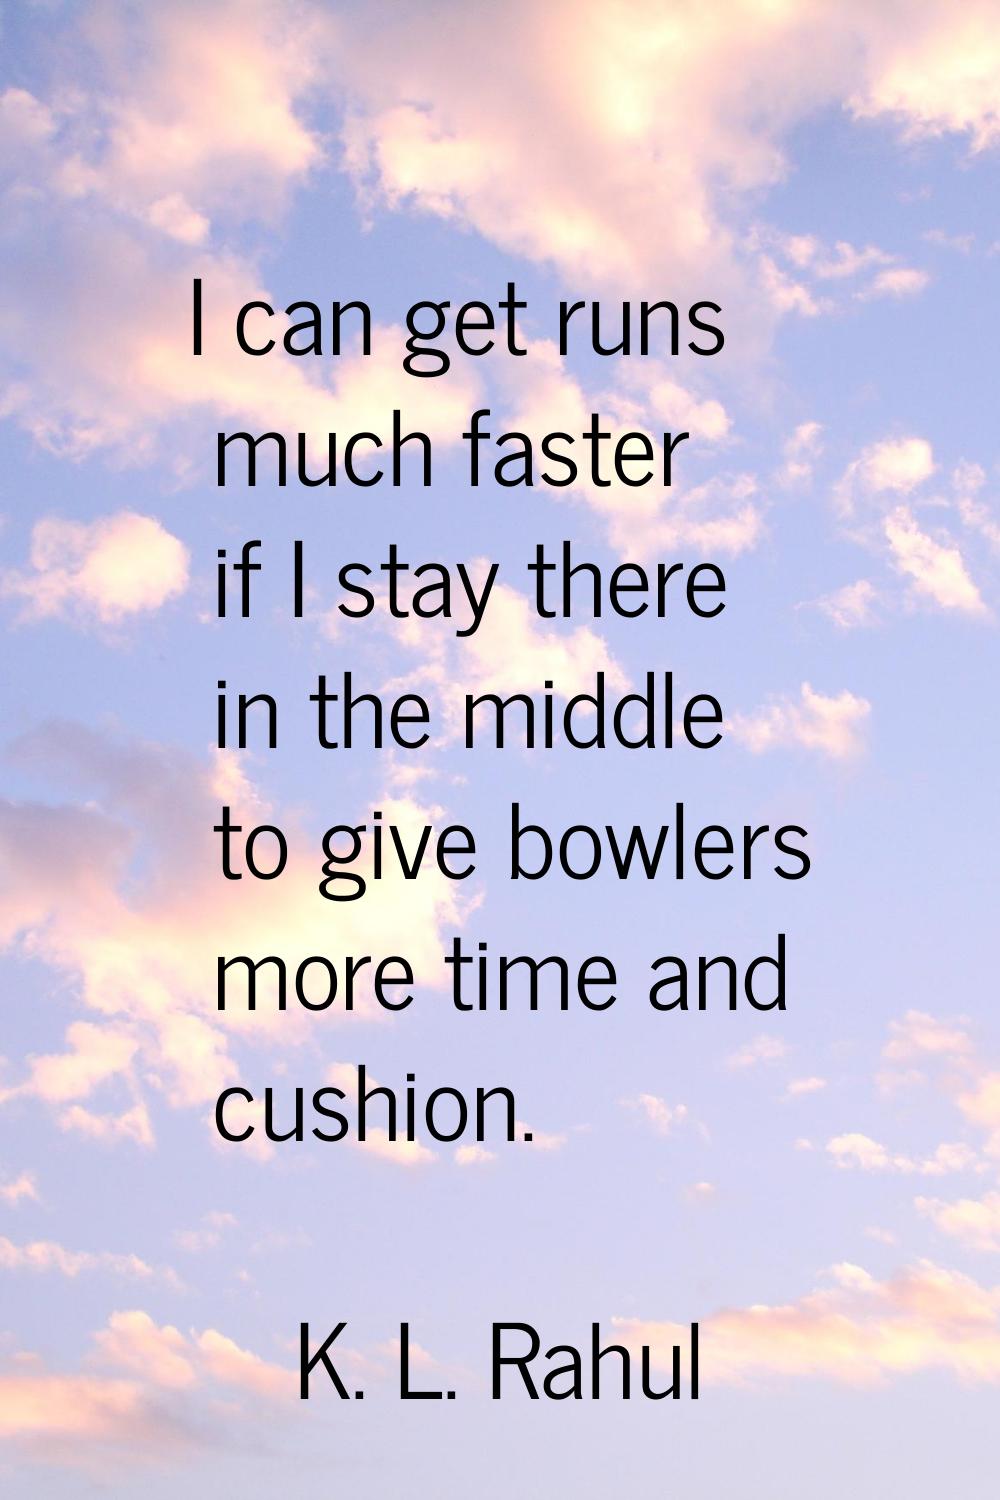 I can get runs much faster if I stay there in the middle to give bowlers more time and cushion.